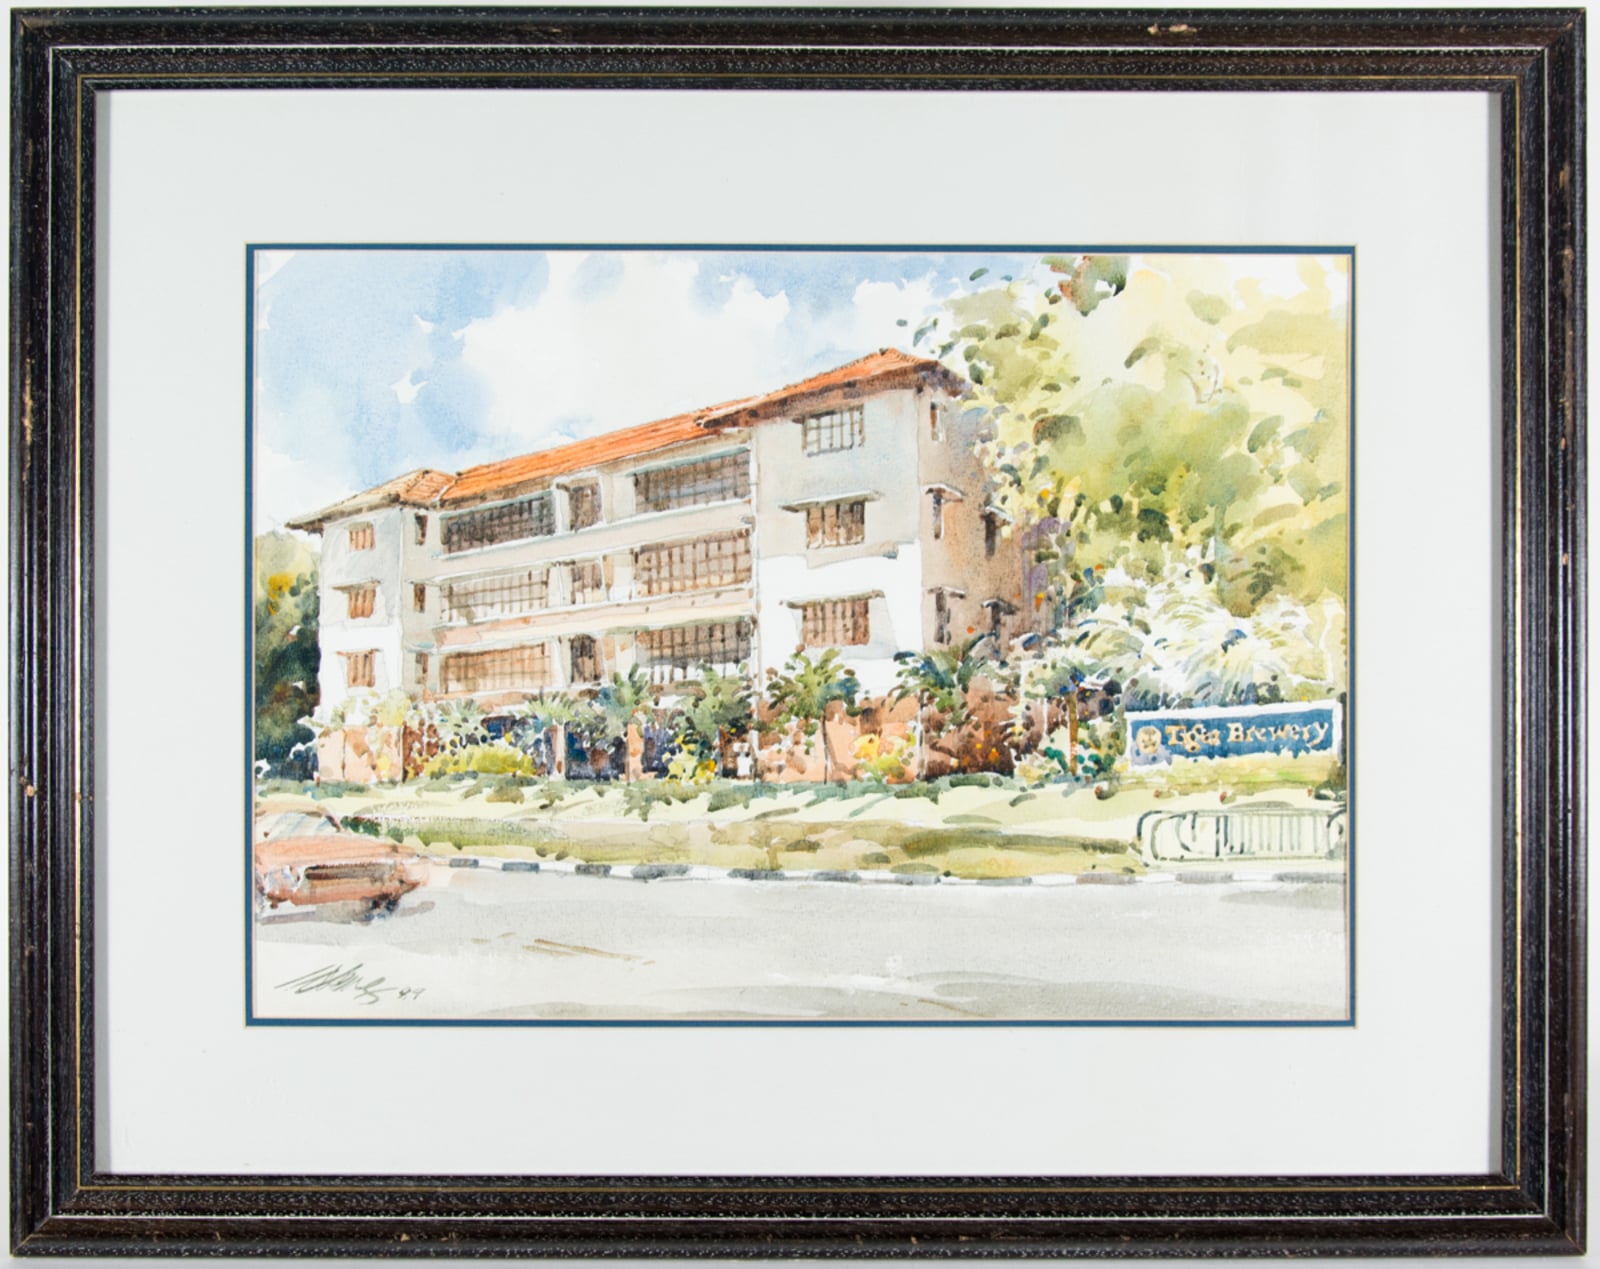 Watercolour painting of Tiger Brewery by Ong Kim Seng, 1987